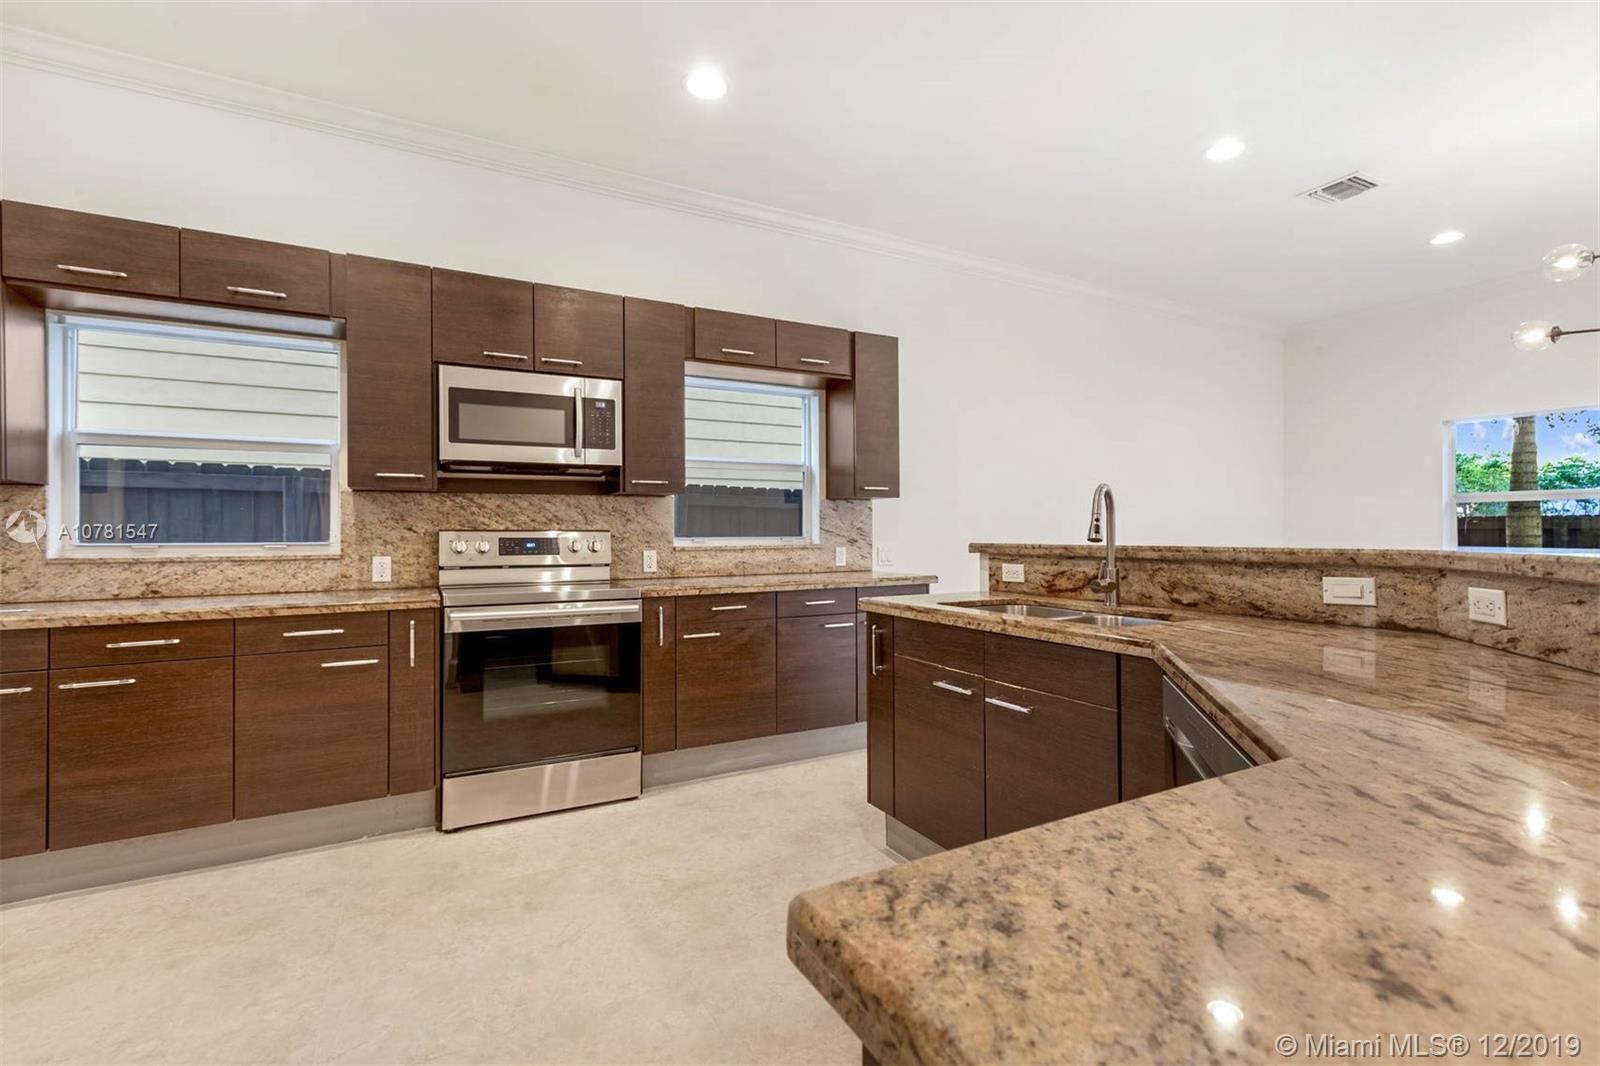 a kitchen with stainless steel appliances kitchen island granite countertop a sink stove and oven